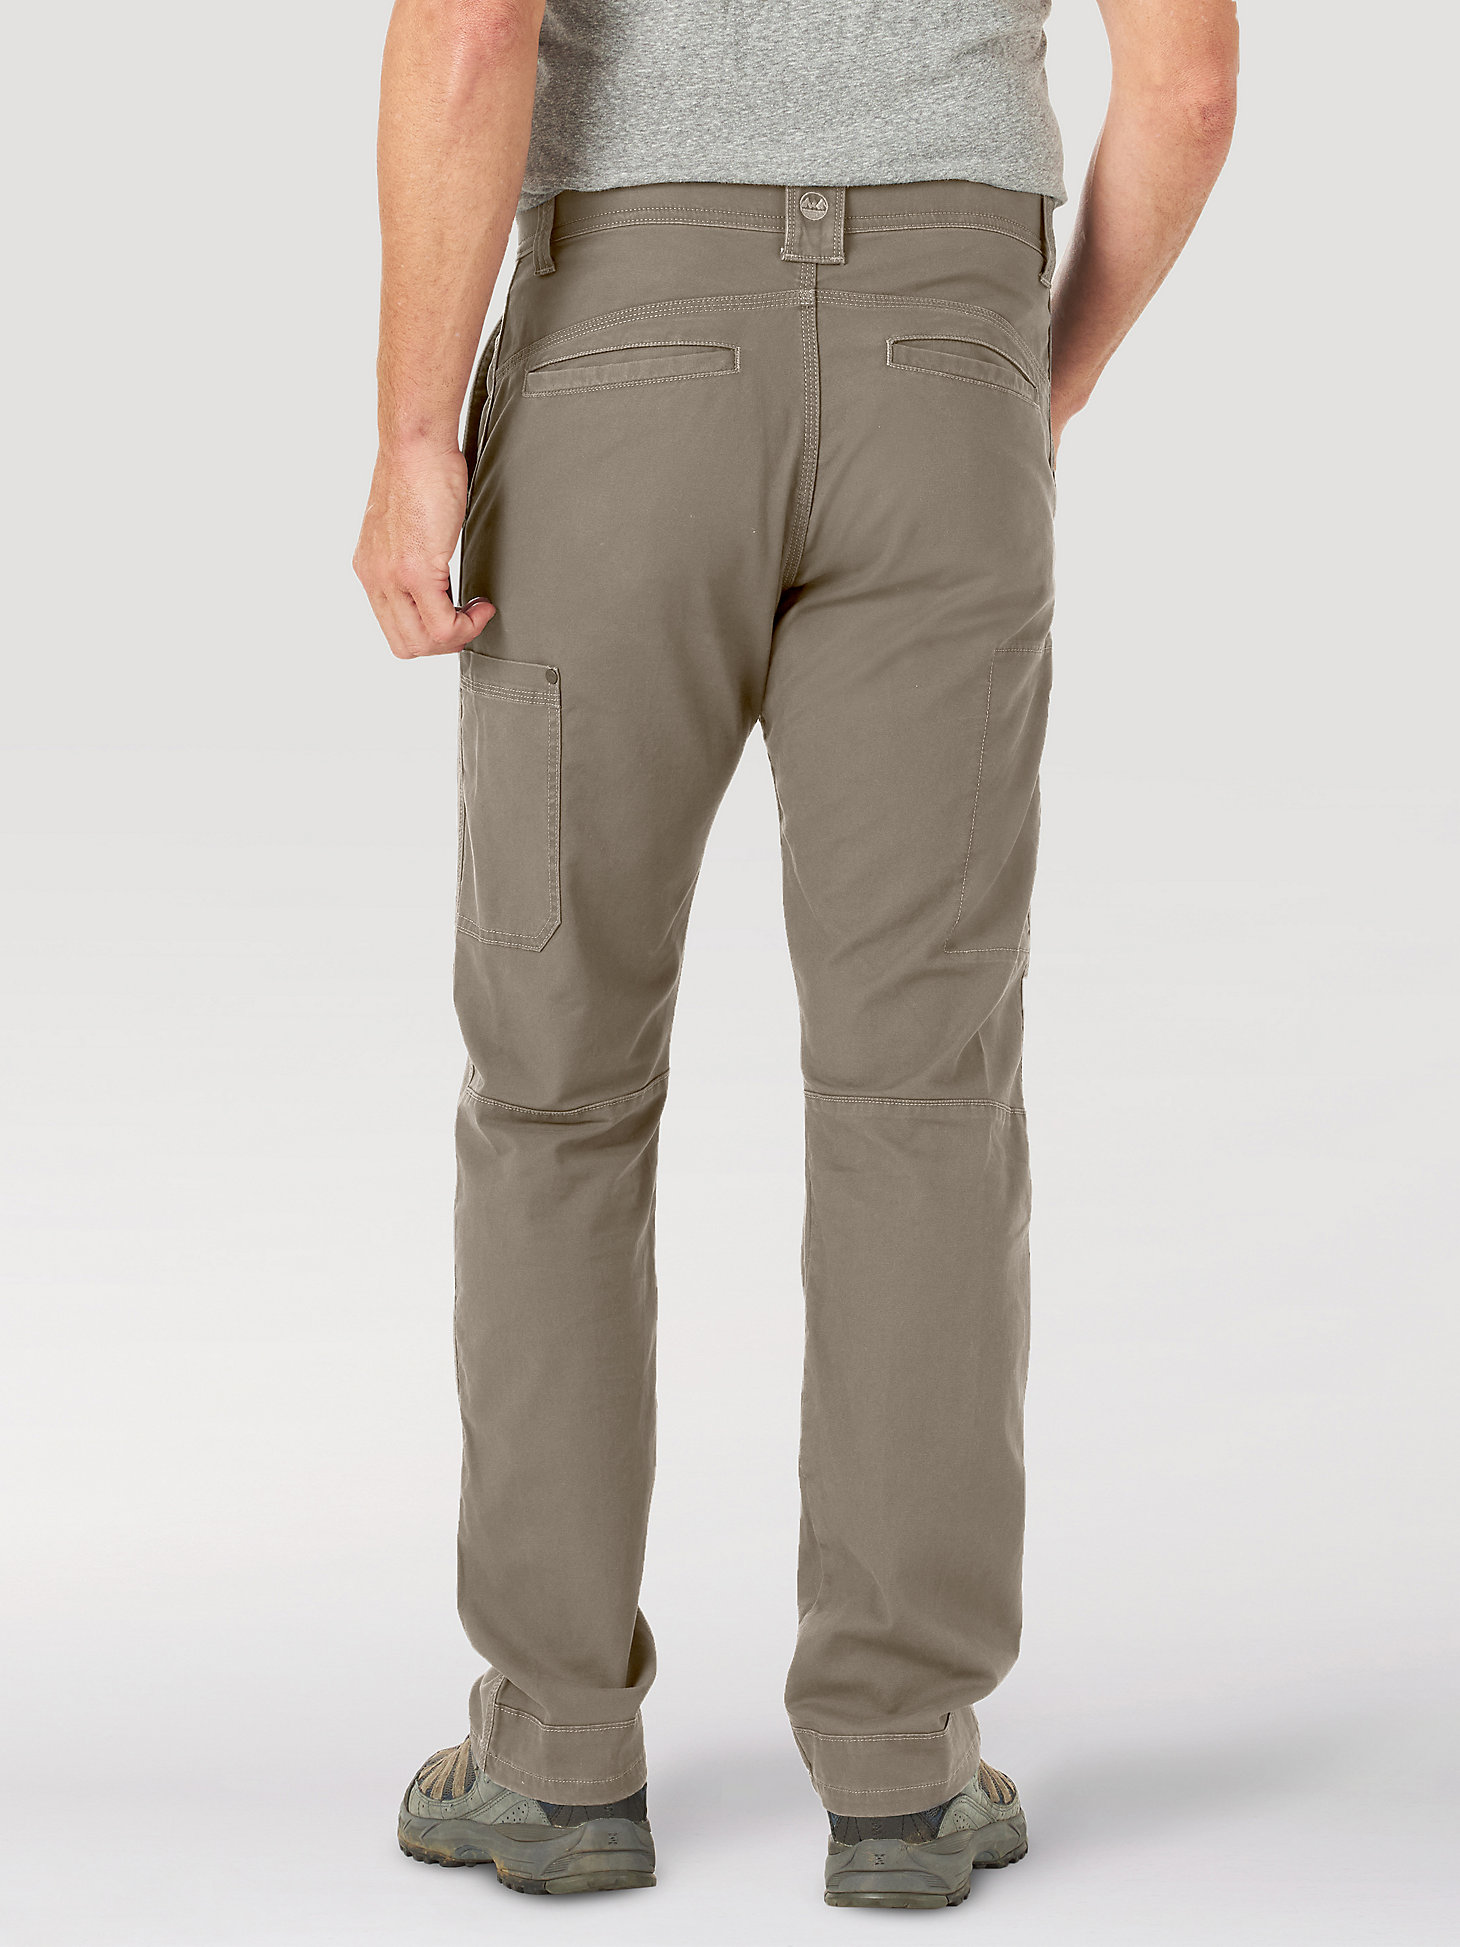 Men's Wrangler® Outdoor Rugged Utility Pant in Brindle alternative view 1